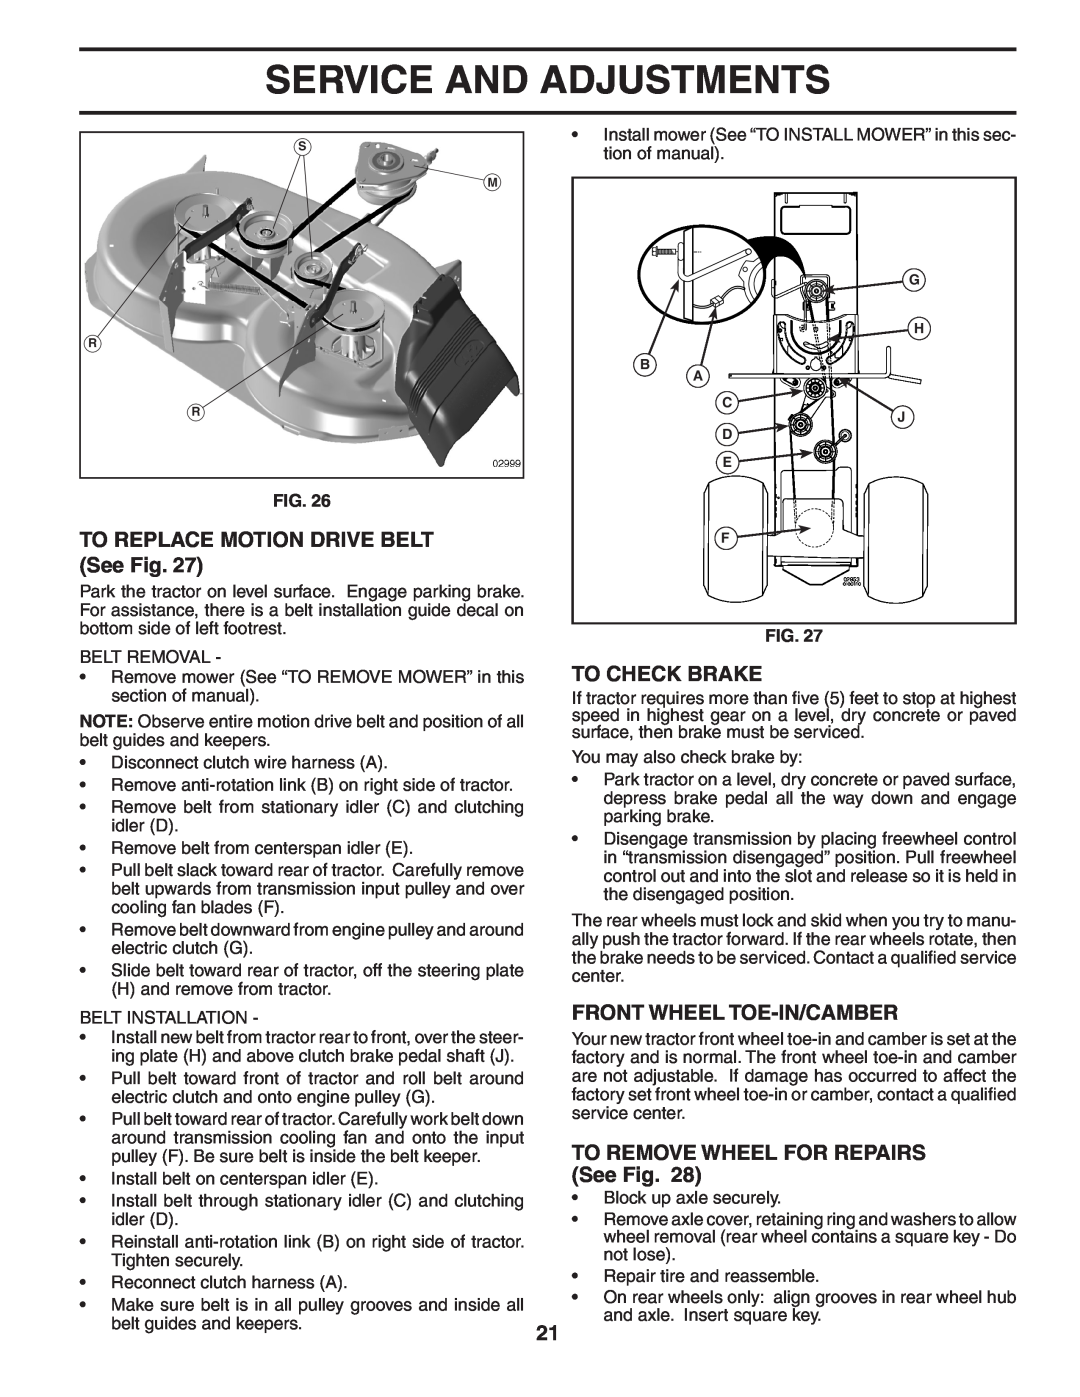 Husqvarna YTH20F42T owner manual TO REPLACE MOTION DRIVE BELT See Fig, To Check Brake, Front Wheel Toe-In/Camber 